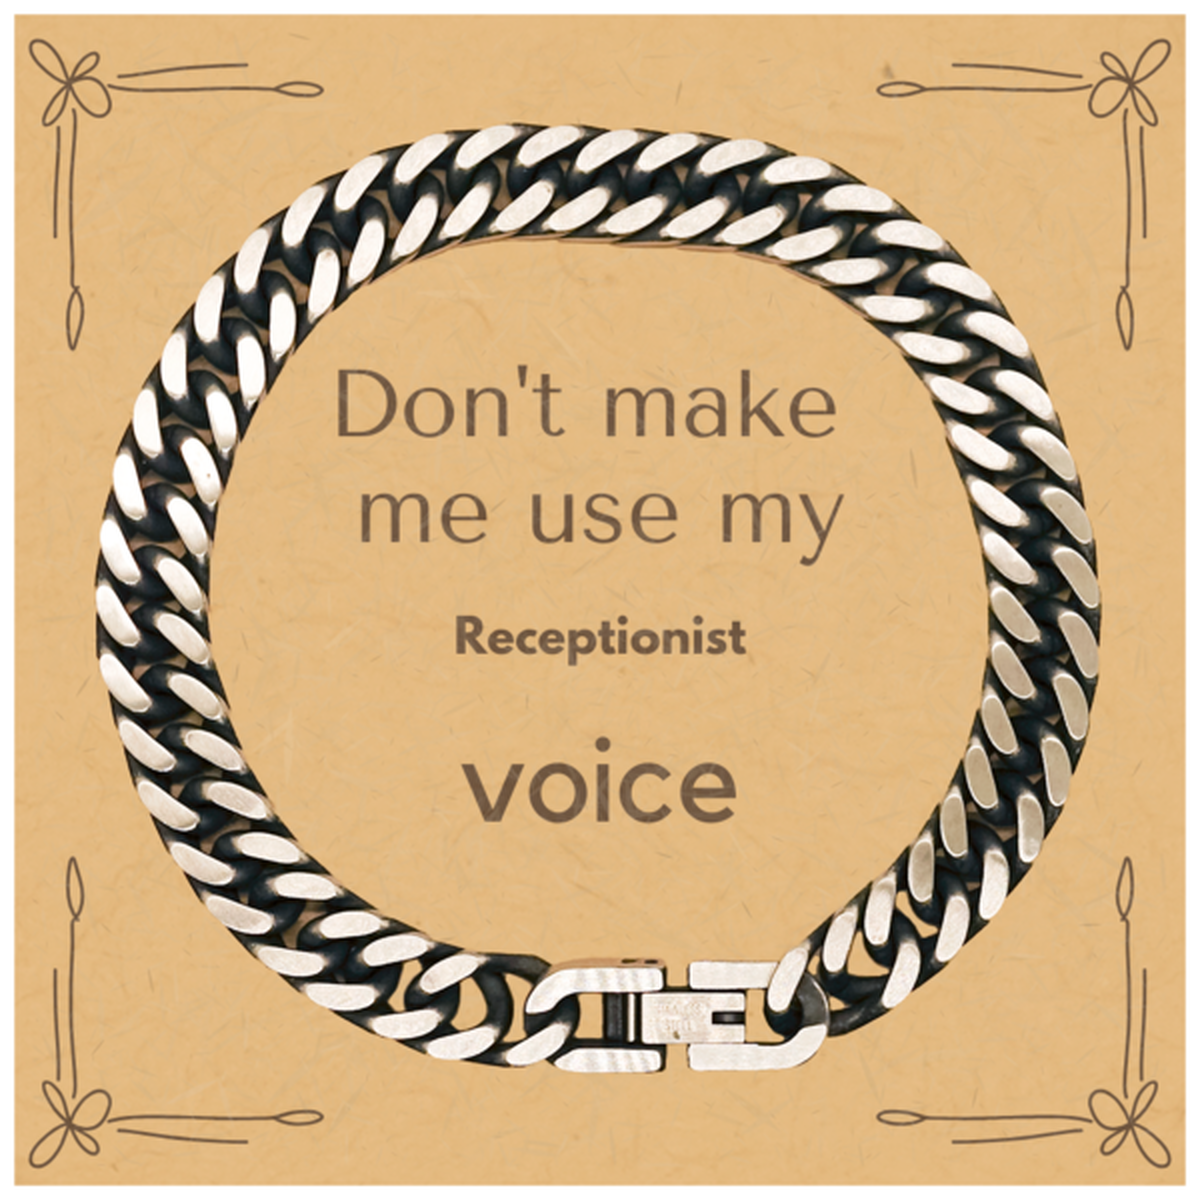 Don't make me use my Receptionist voice, Sarcasm Receptionist Card Gifts, Christmas Receptionist Cuban Link Chain Bracelet Birthday Unique Gifts For Receptionist Coworkers, Men, Women, Colleague, Friends